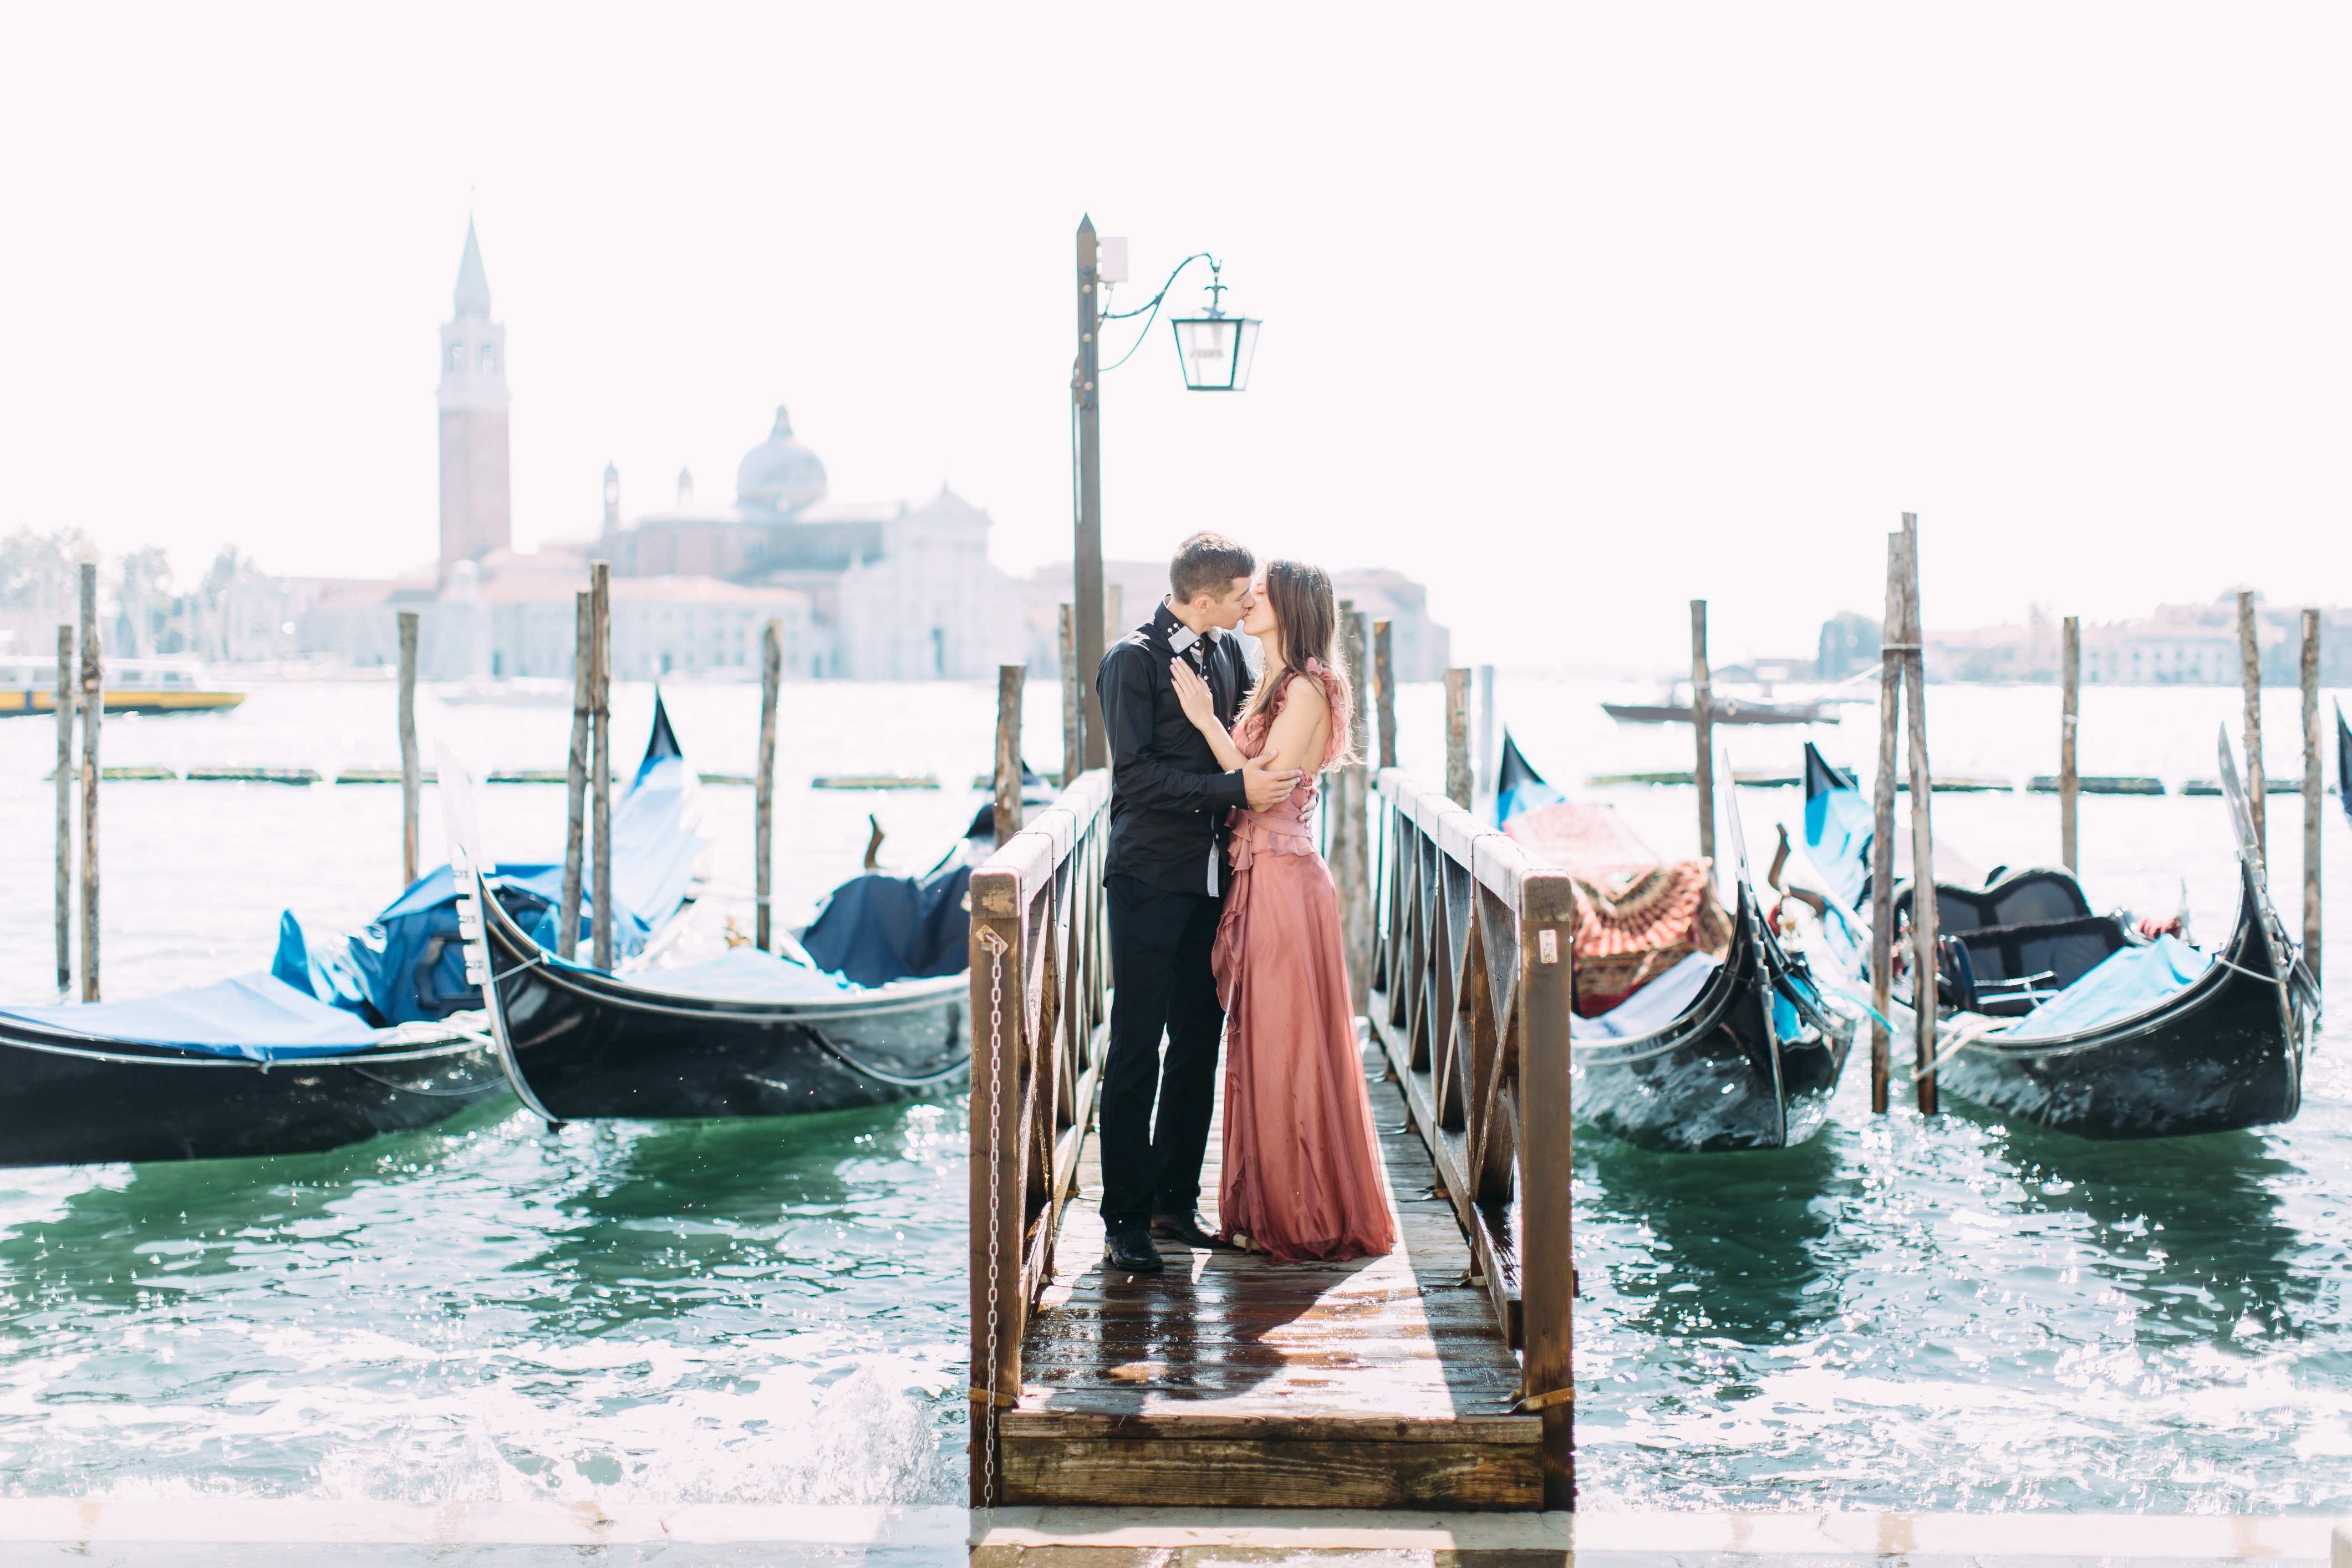 Top Italy Honeymoon Destinations for a once-in-a-lifetime experience